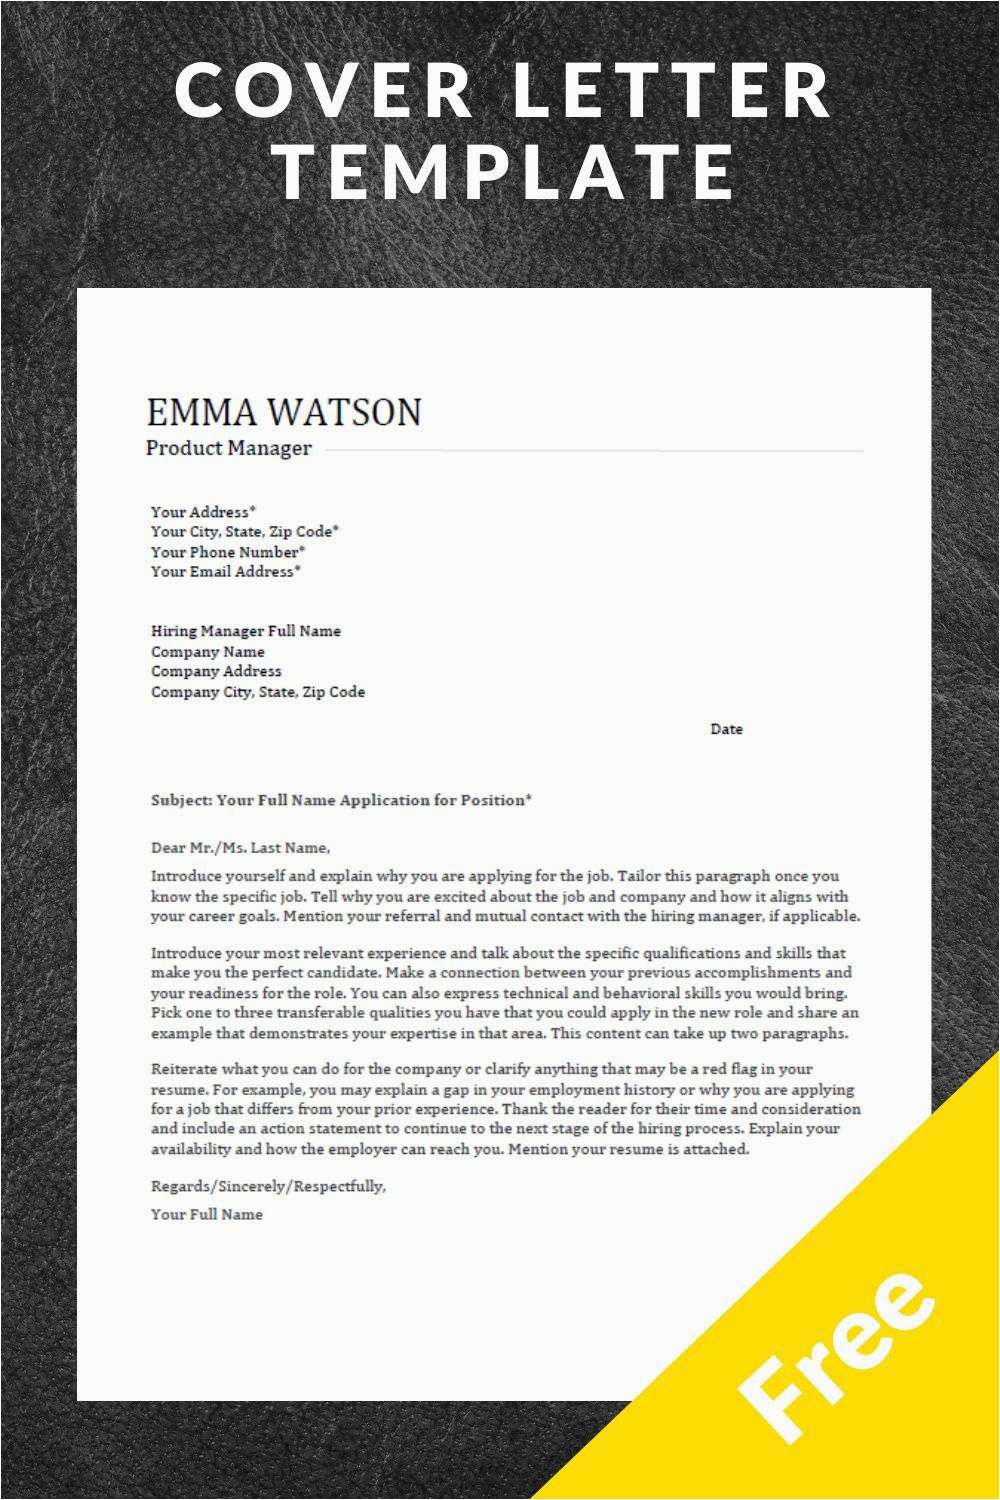 Resume and Cover Letter Template Free Download Cover Letter Template Download for Free